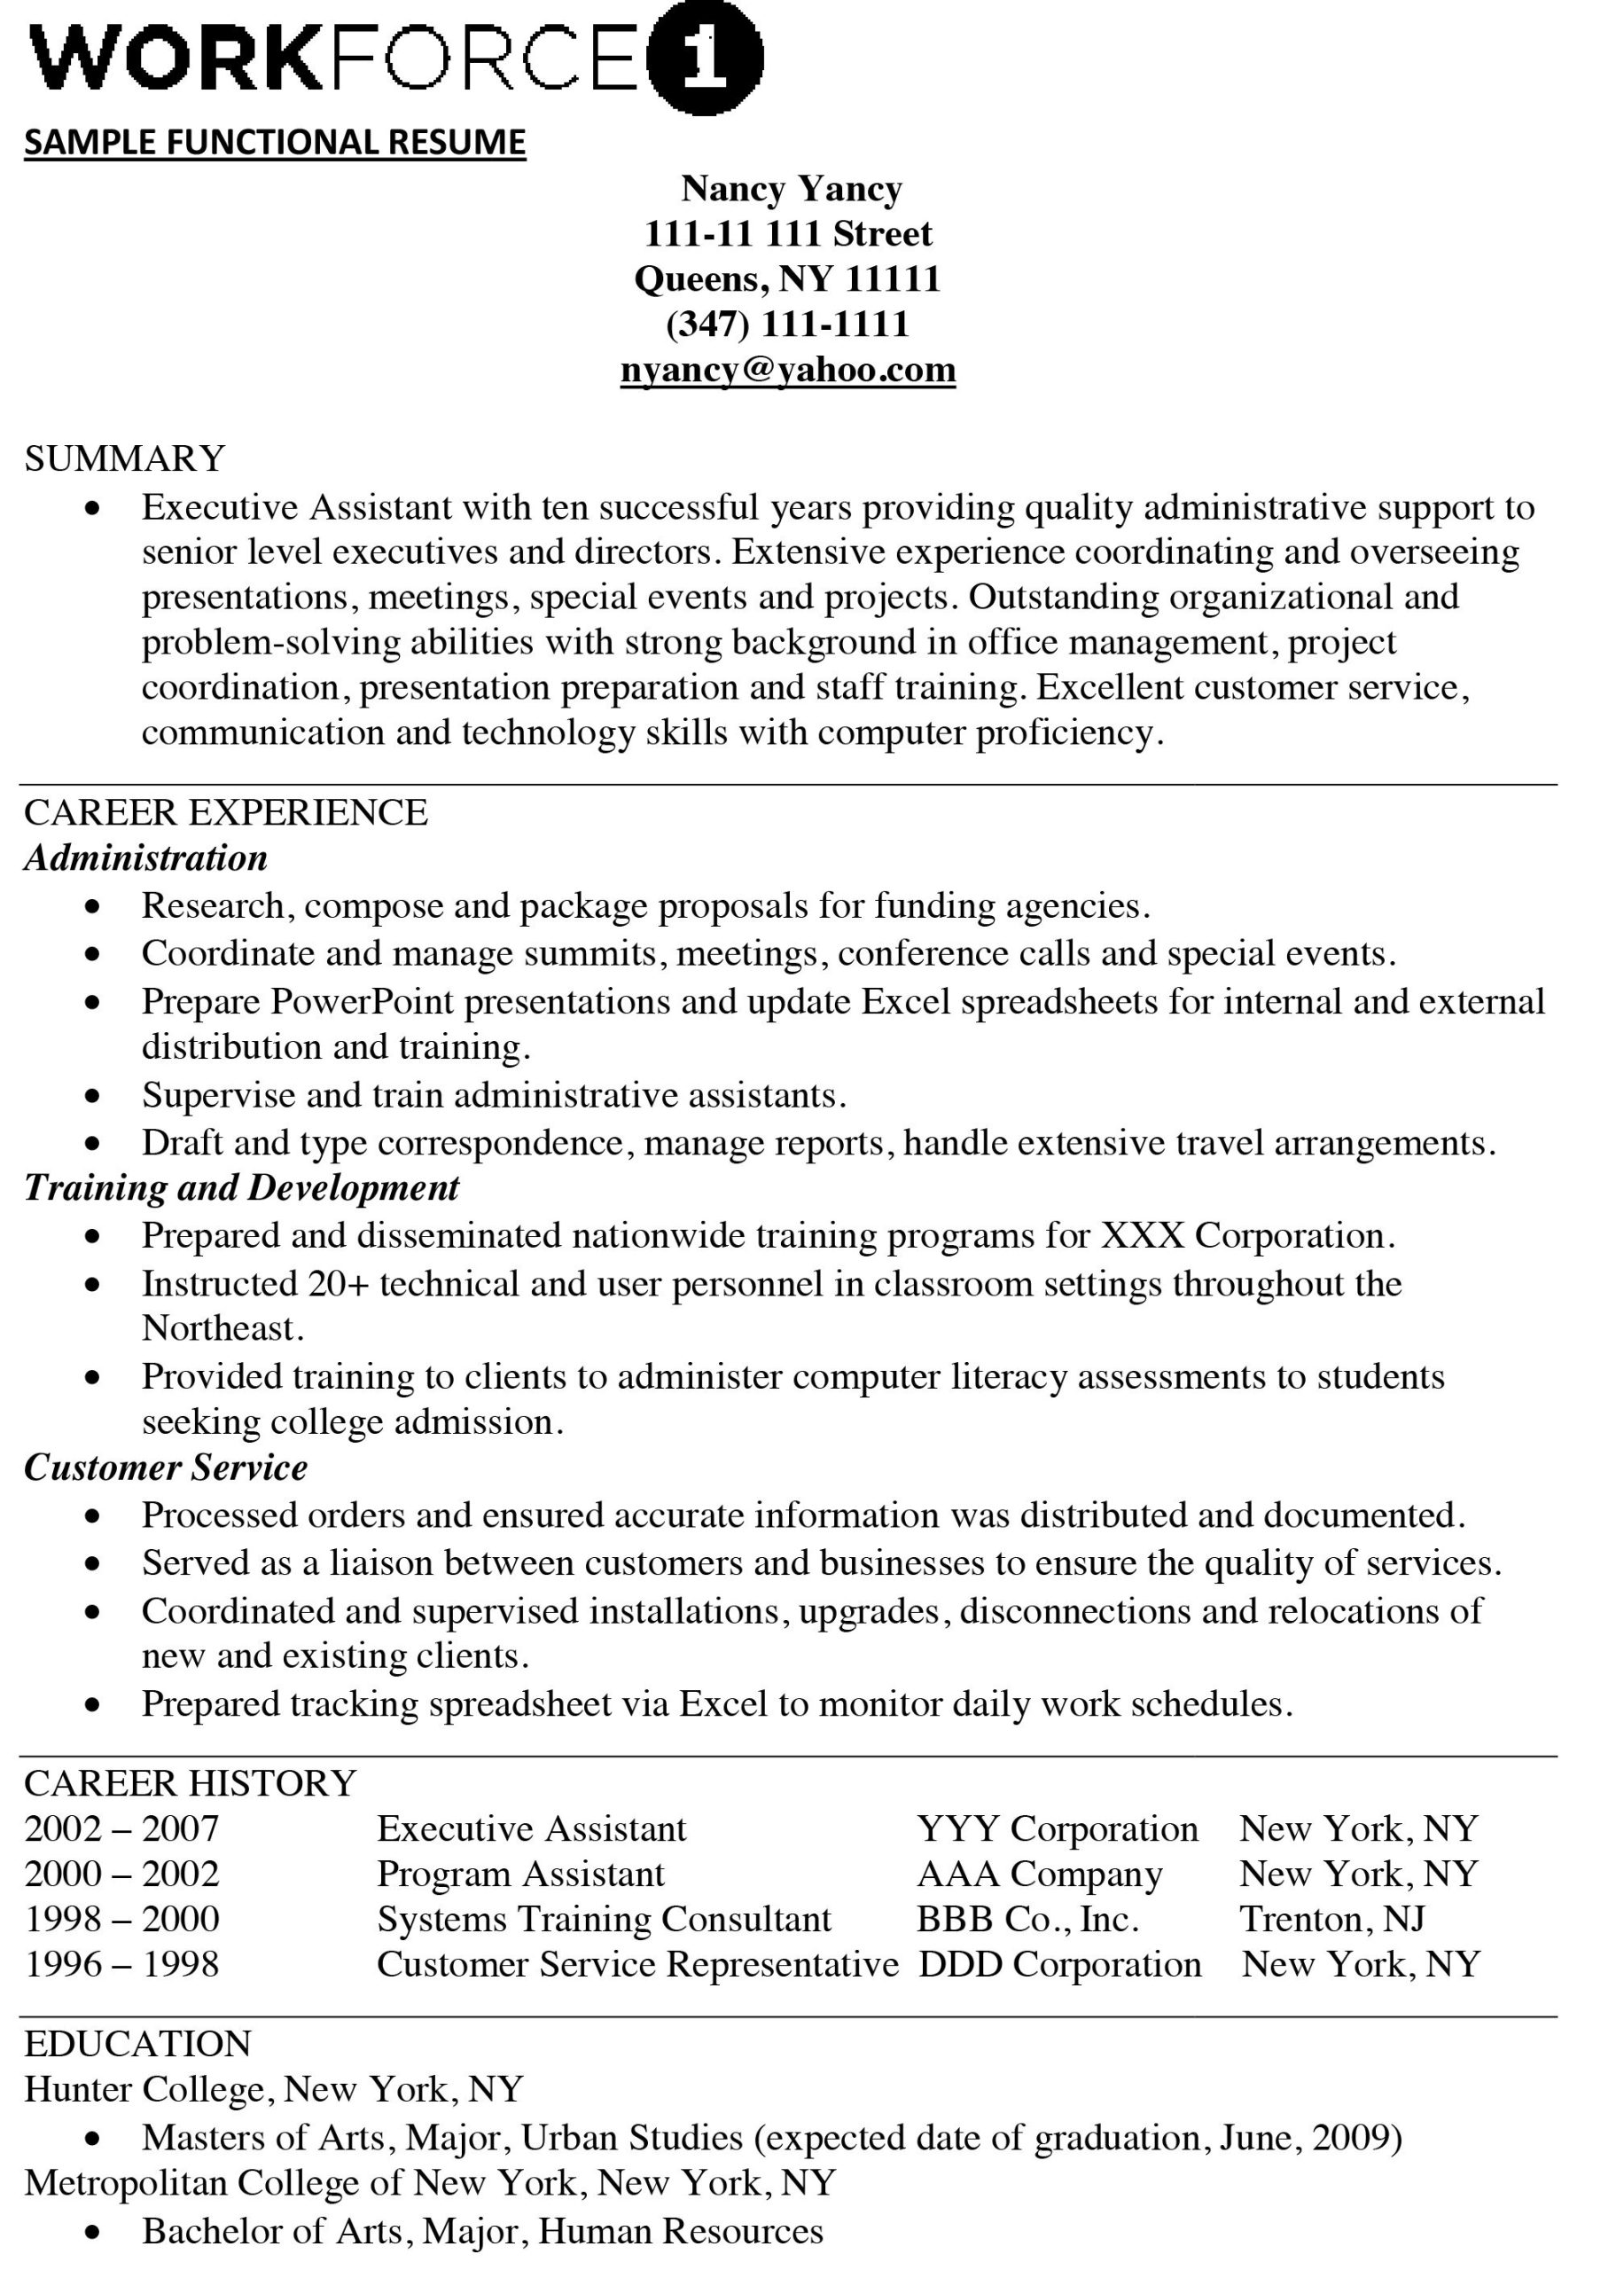 Sample Resume Of Moms Returning to Work A Resume formatting Guide for Women Returning to the Workplace